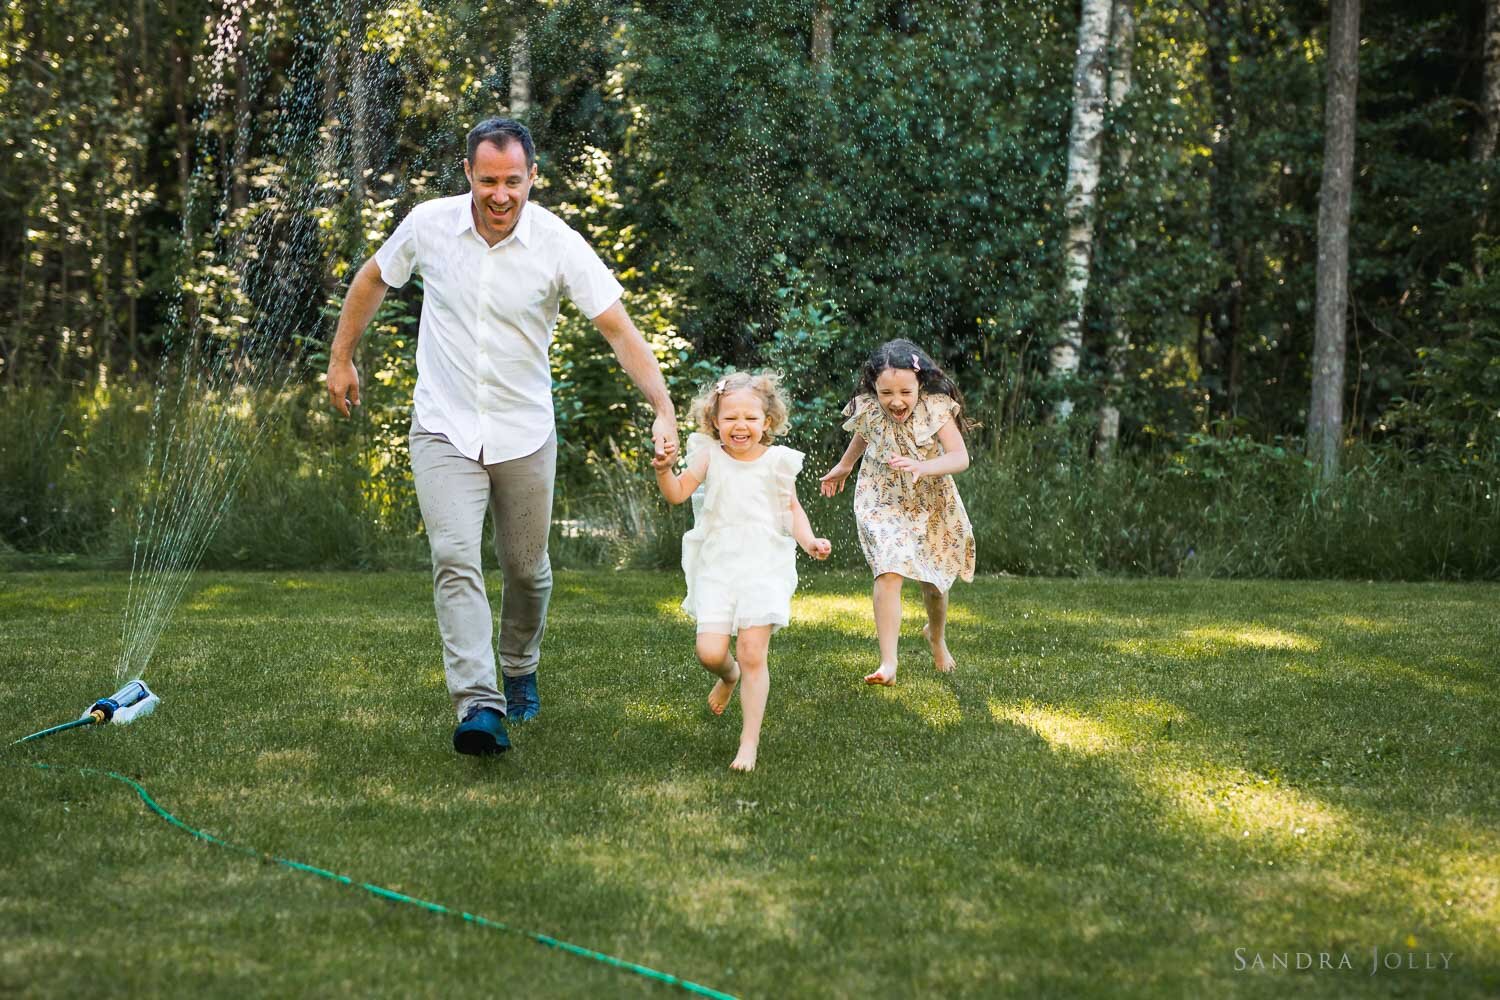 dad-and-daughters-running-through-sprinkler-by-sandra-jolly-photography.jpg